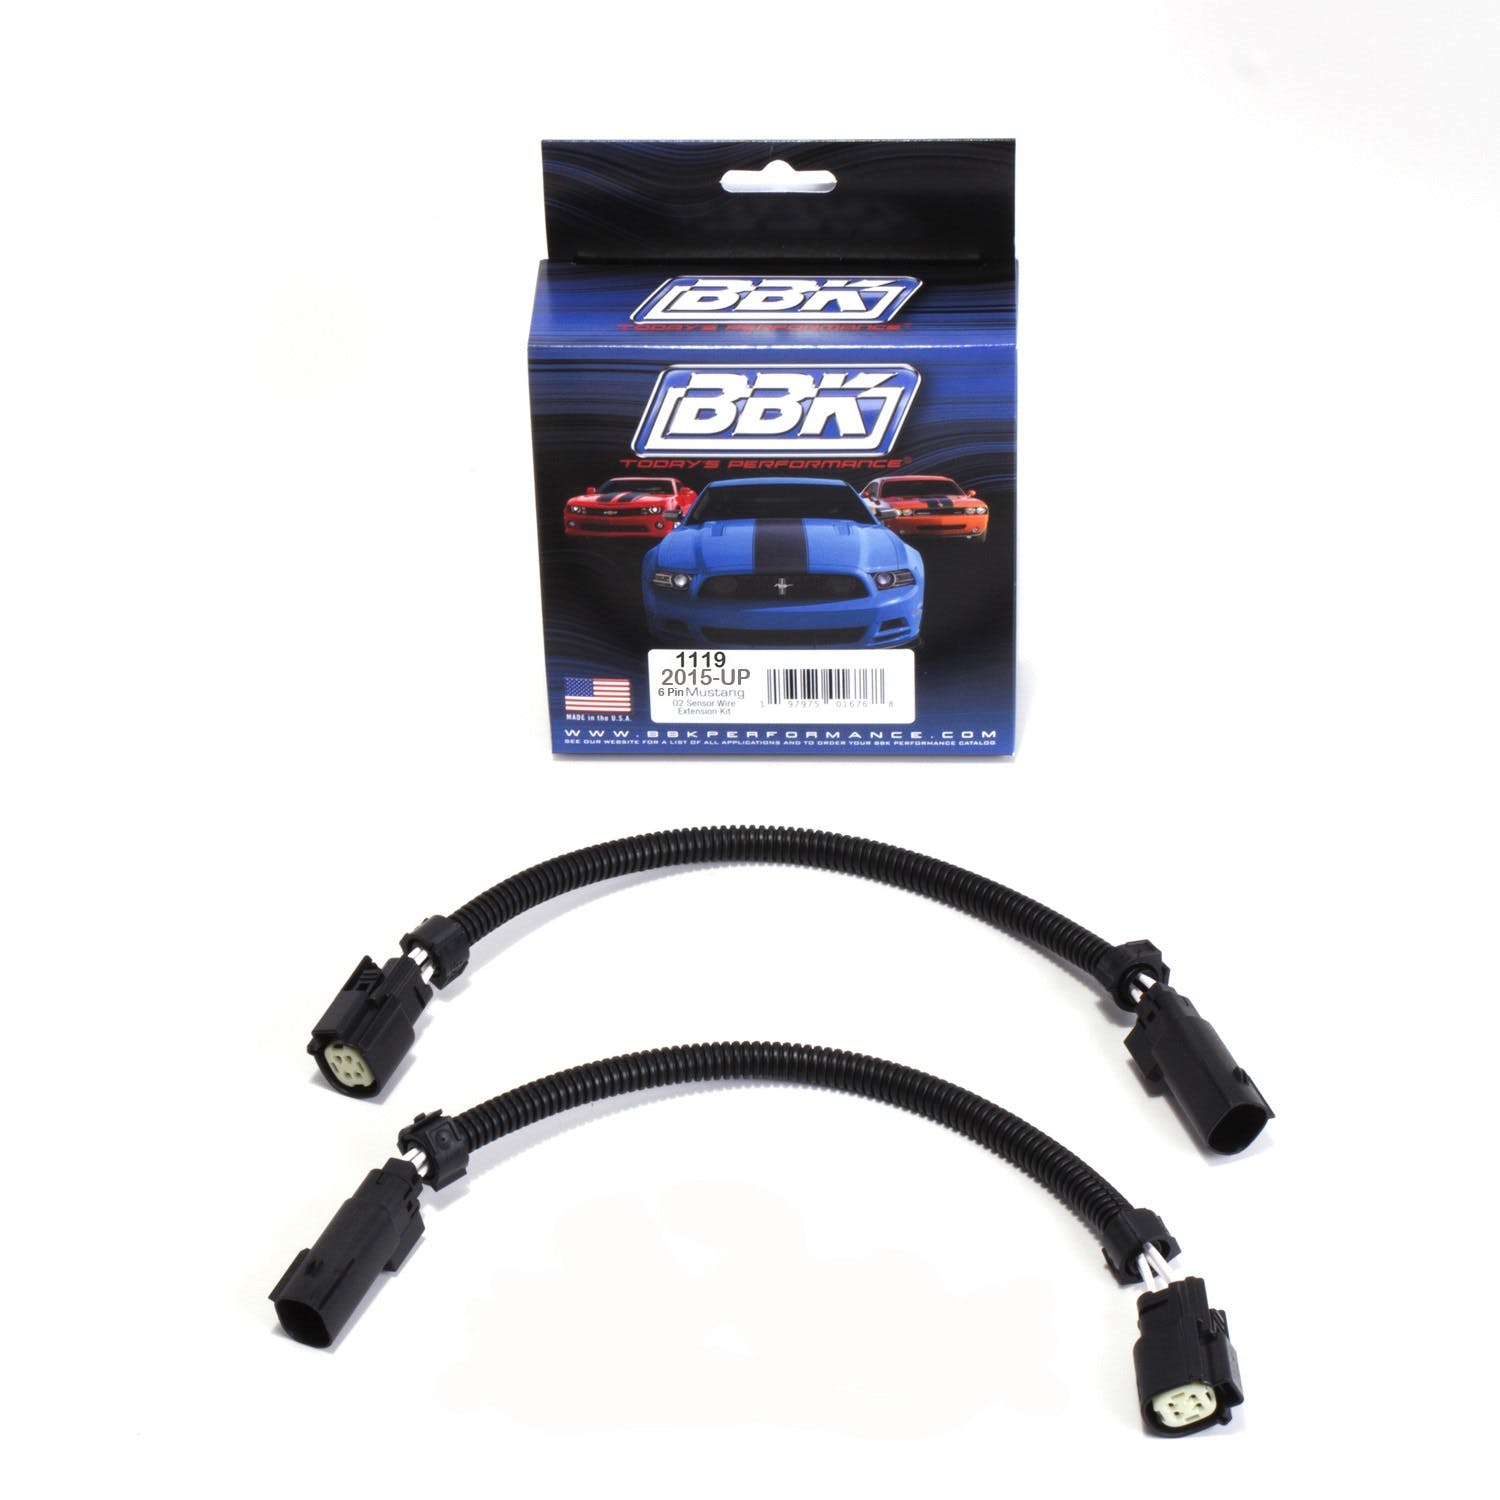 BBK Performance Parts 1119 O2 Sensor Wire Extension Harness